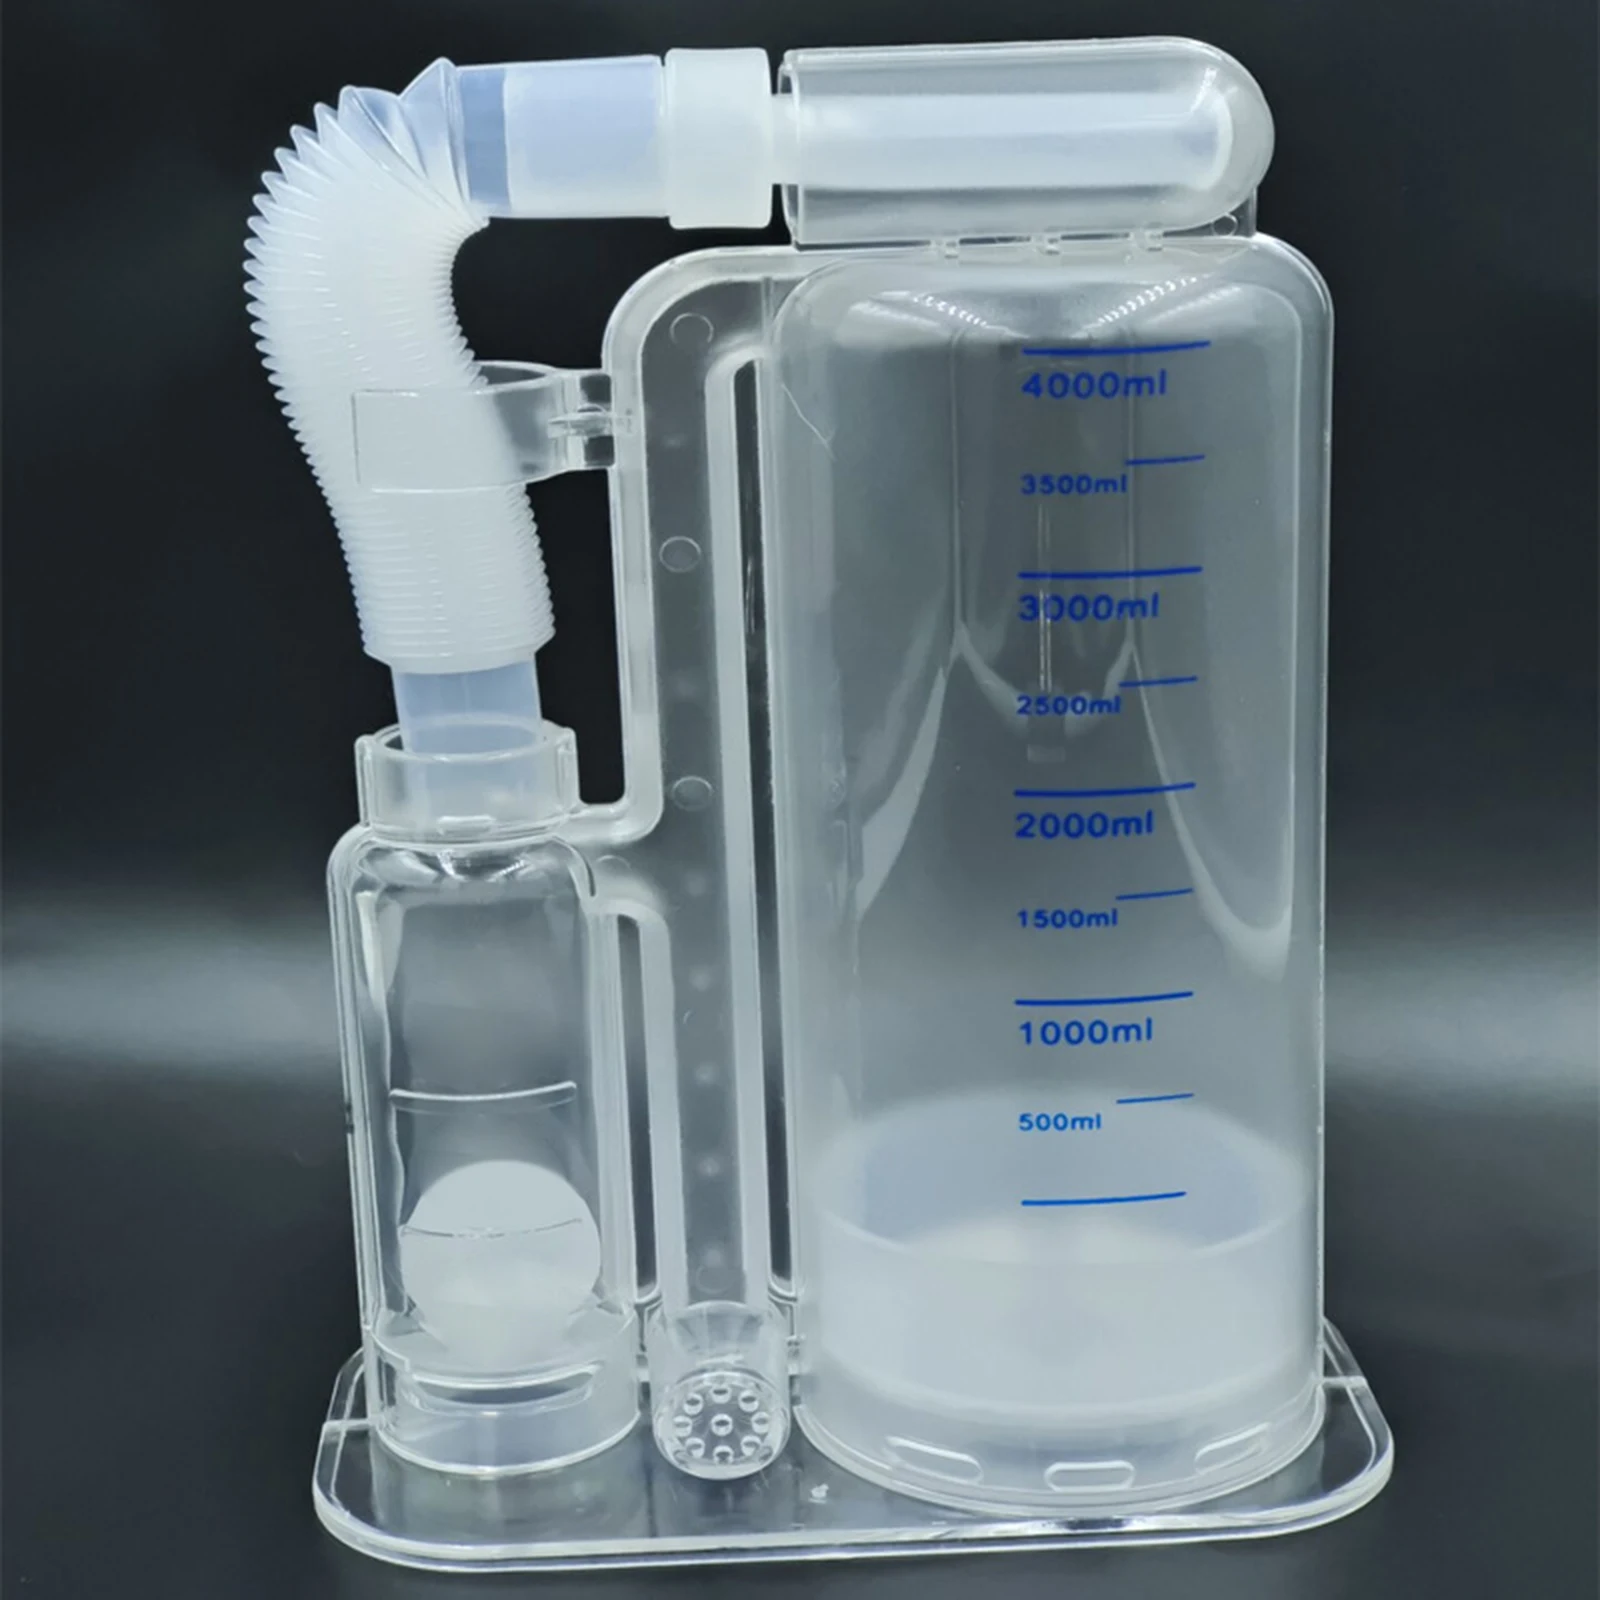 4000ml Single-Ball Breathing Trainer Lung Exerciser Incentive Spirometer Breath Measurement System for Deep Breath Training